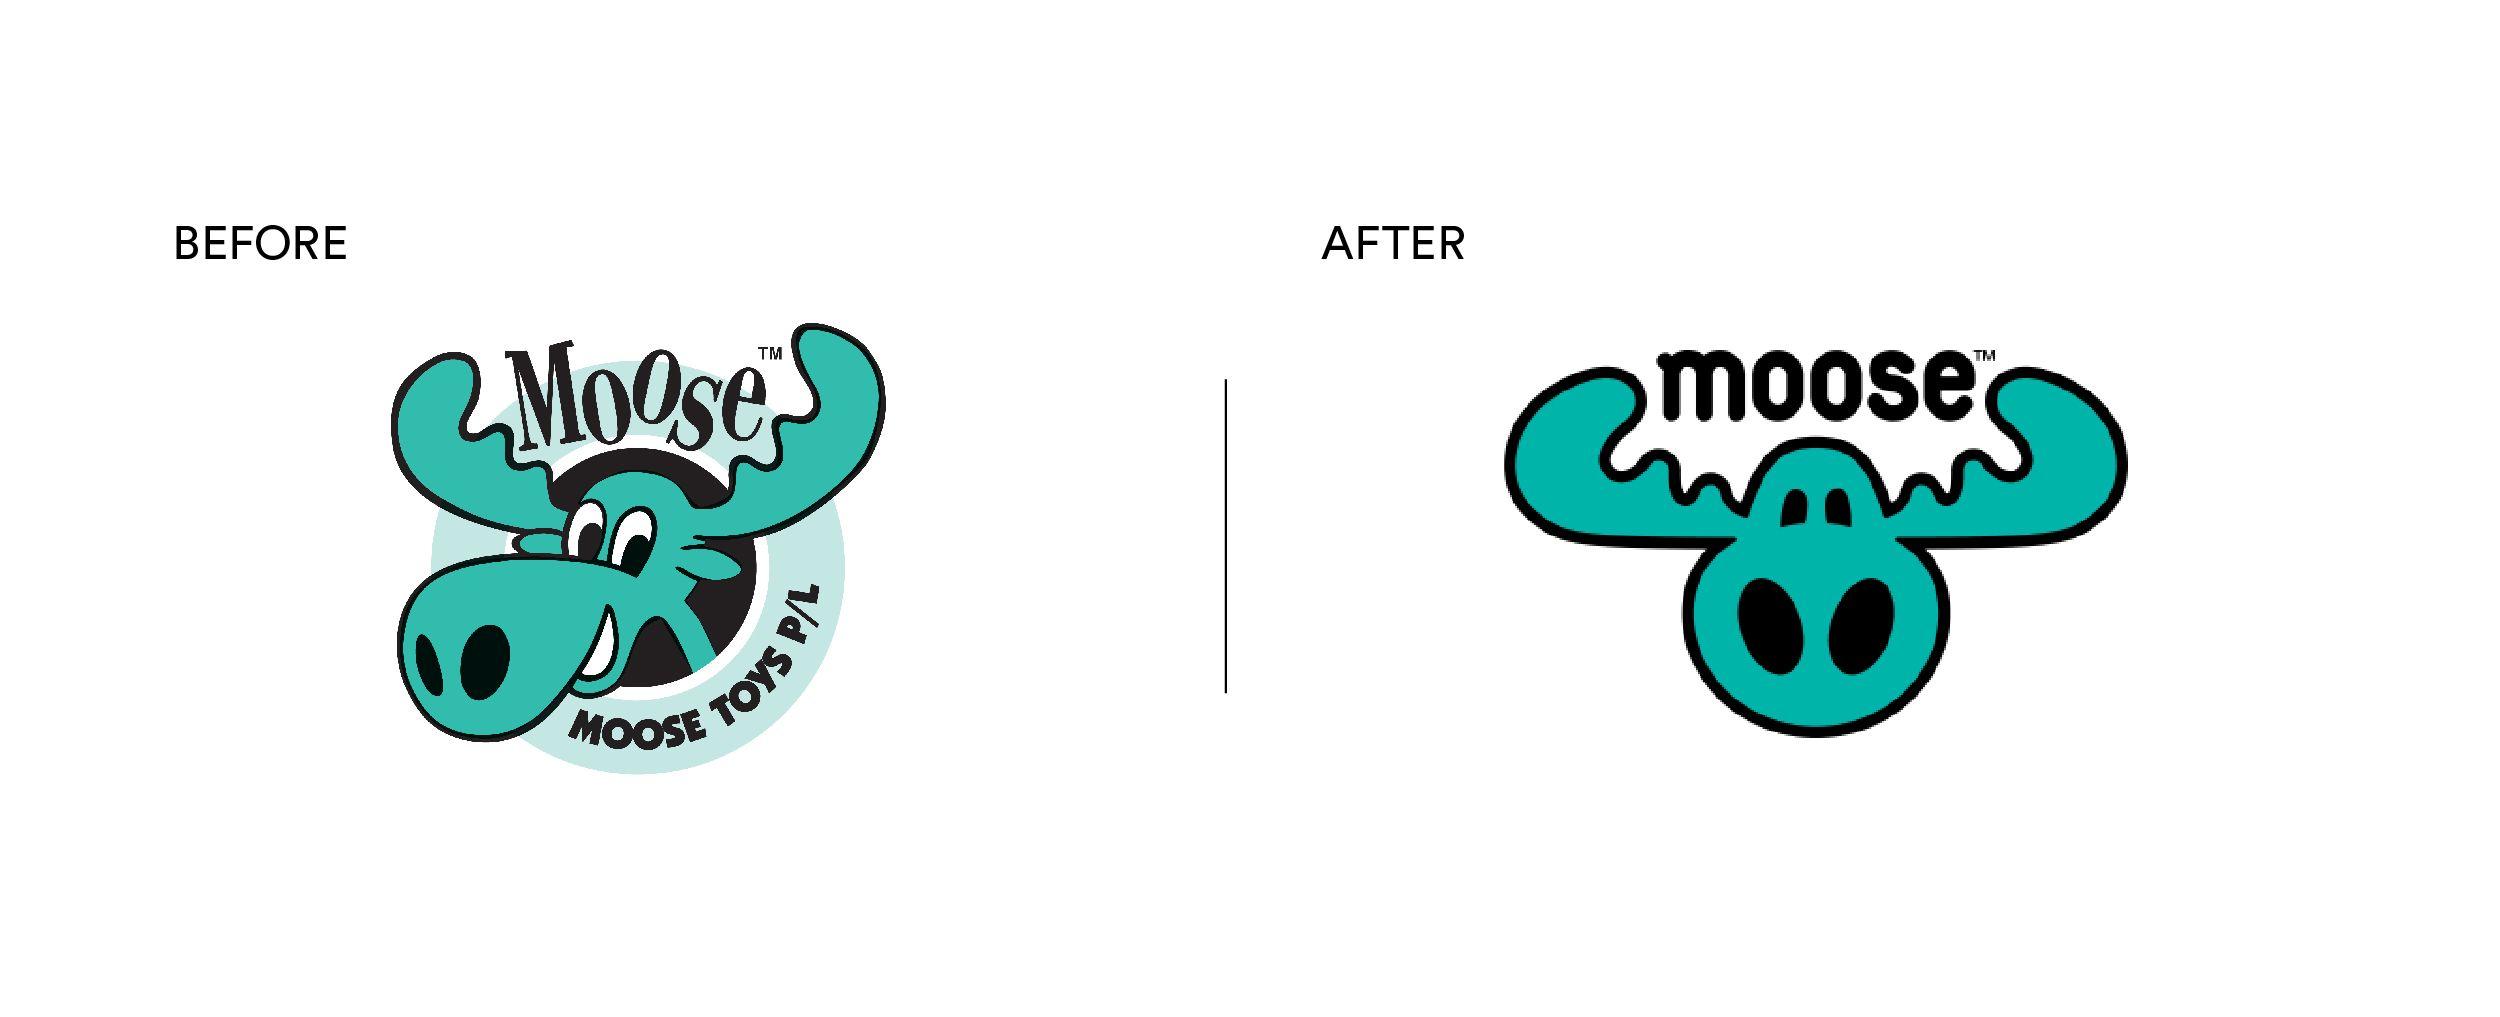 Moose Toys Logo - A fresh look at some of our brand refreshes - Brands to life®